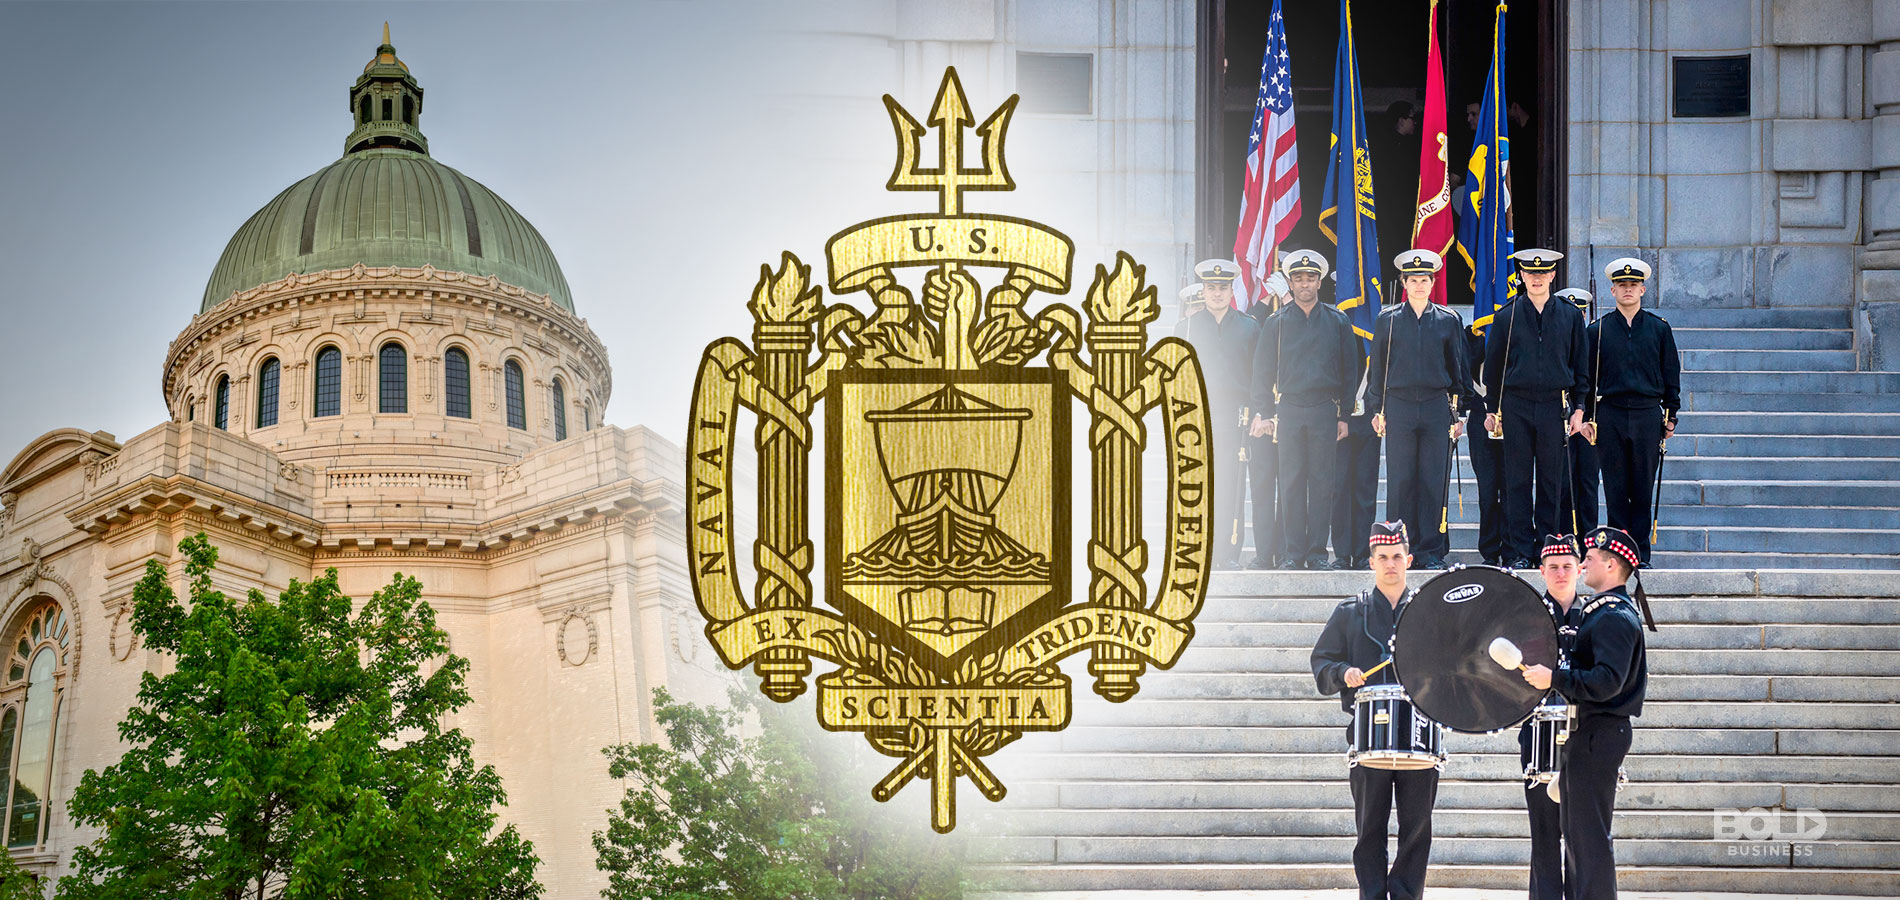 The US Naval Academy: Adapting for Modern Naval Leadership Challenges